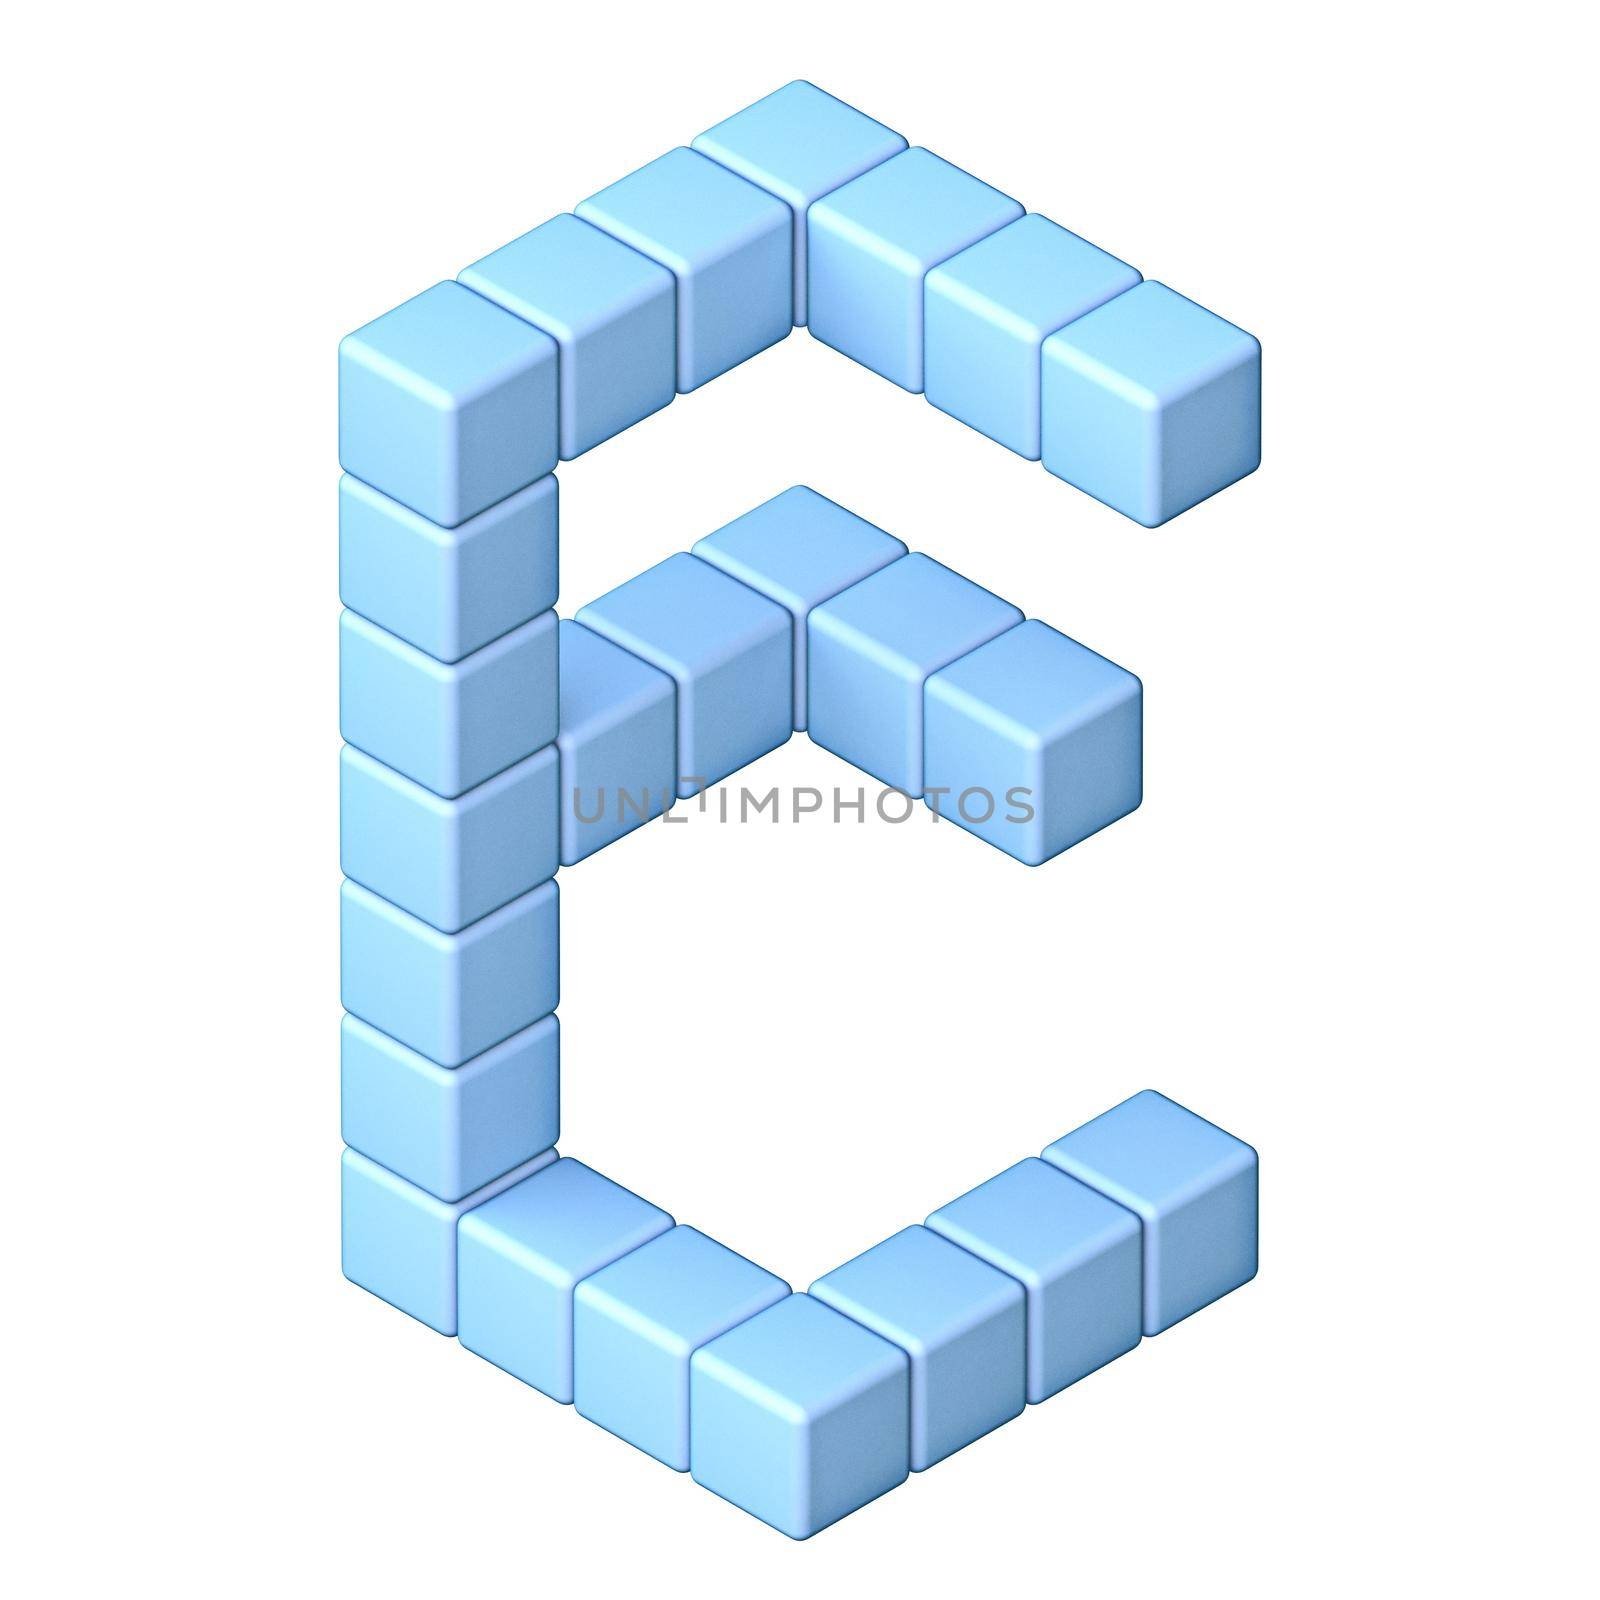 Blue cube orthographic font Letter E 3D render illustration isolated on white background